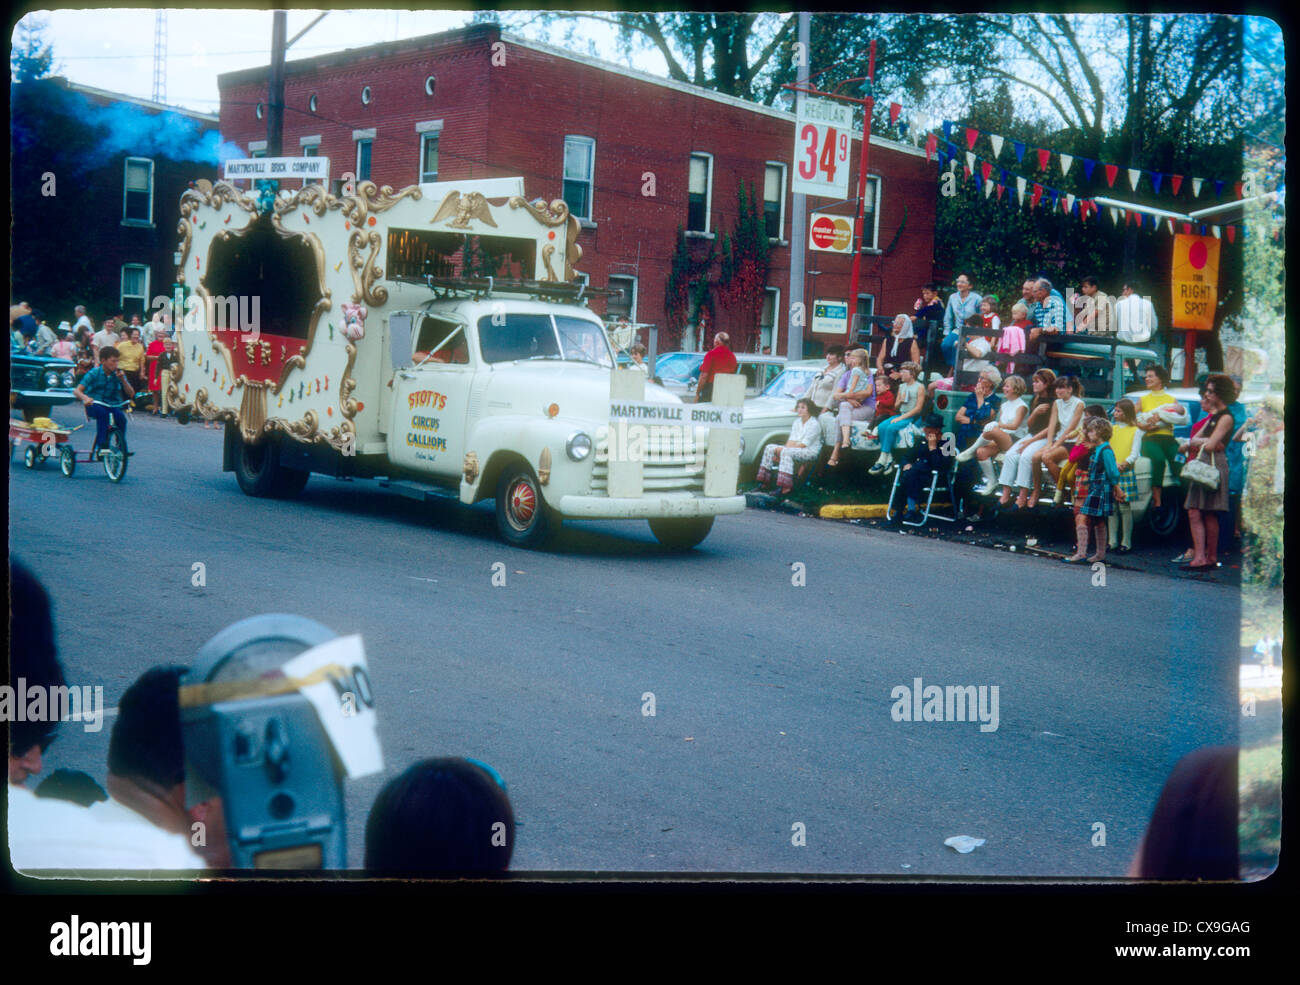 gas prices 1960s 1963 regular 34 cents fall festival parade martinsville indiana gasoline crowd standing on sidewalk passing Stock Photo